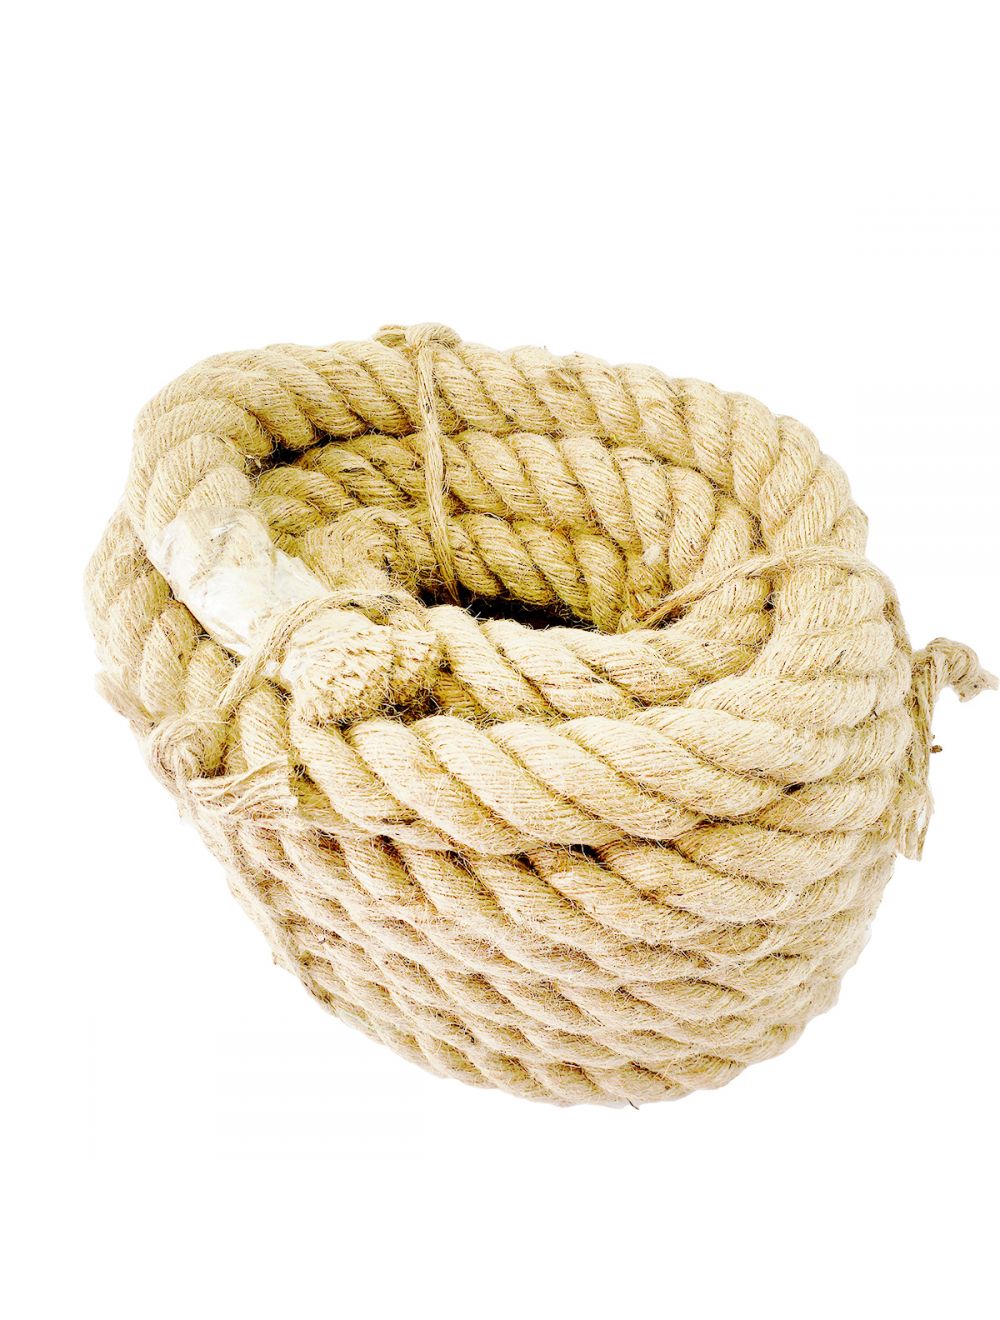 Hemp Rope Jute Rope Natural Jute Rope 10mm Thick Twine String For Crafts  Cats Scratching Post 10m Thick Jute Rope Garden Jute Rope